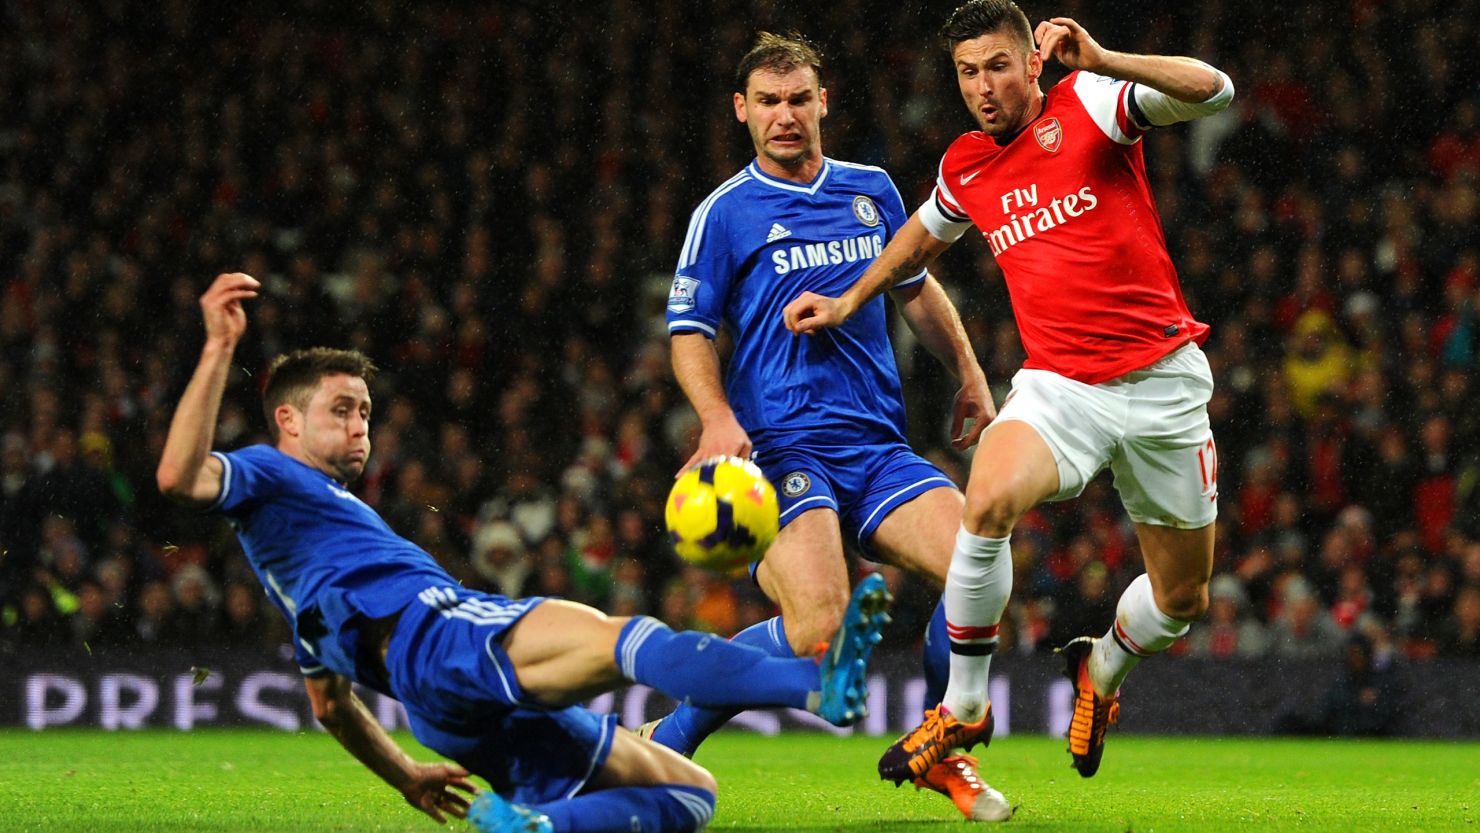 Gary Cahill of Chelsea tackles Olivier Giroud of Arsenal in a wet and windy match in north London